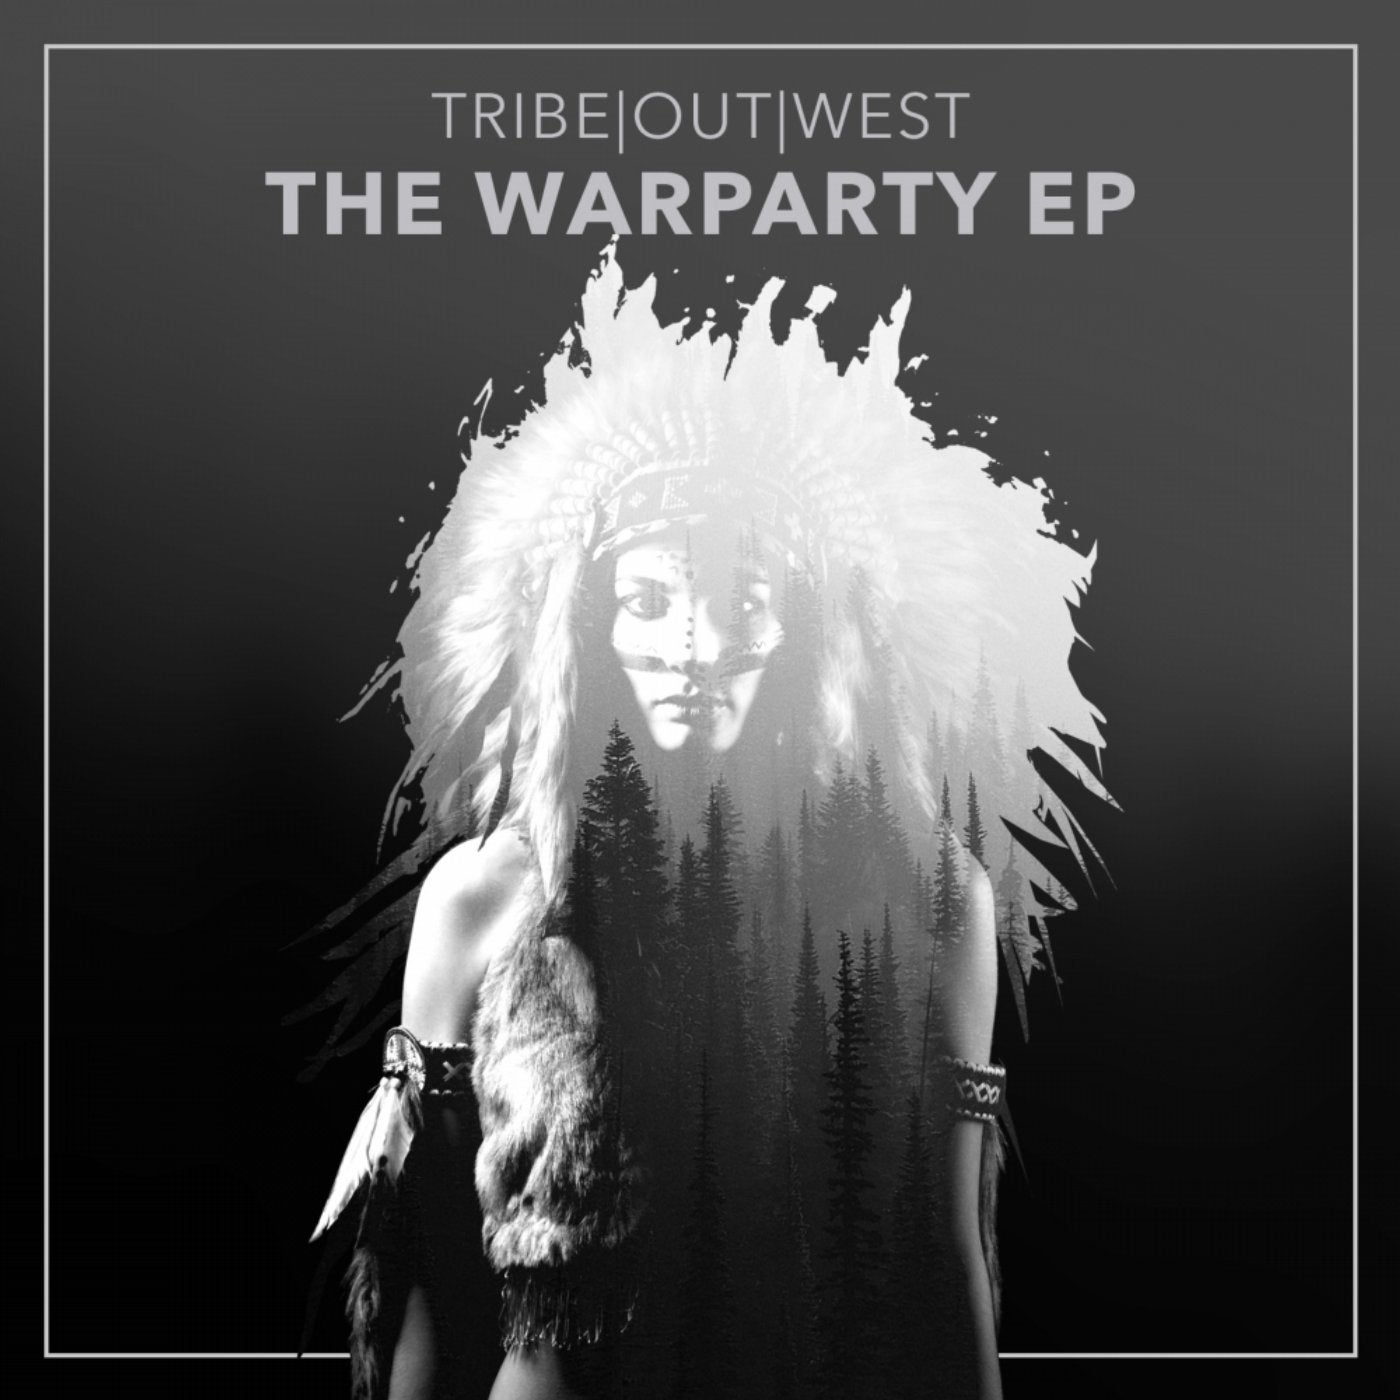 The War Party EP